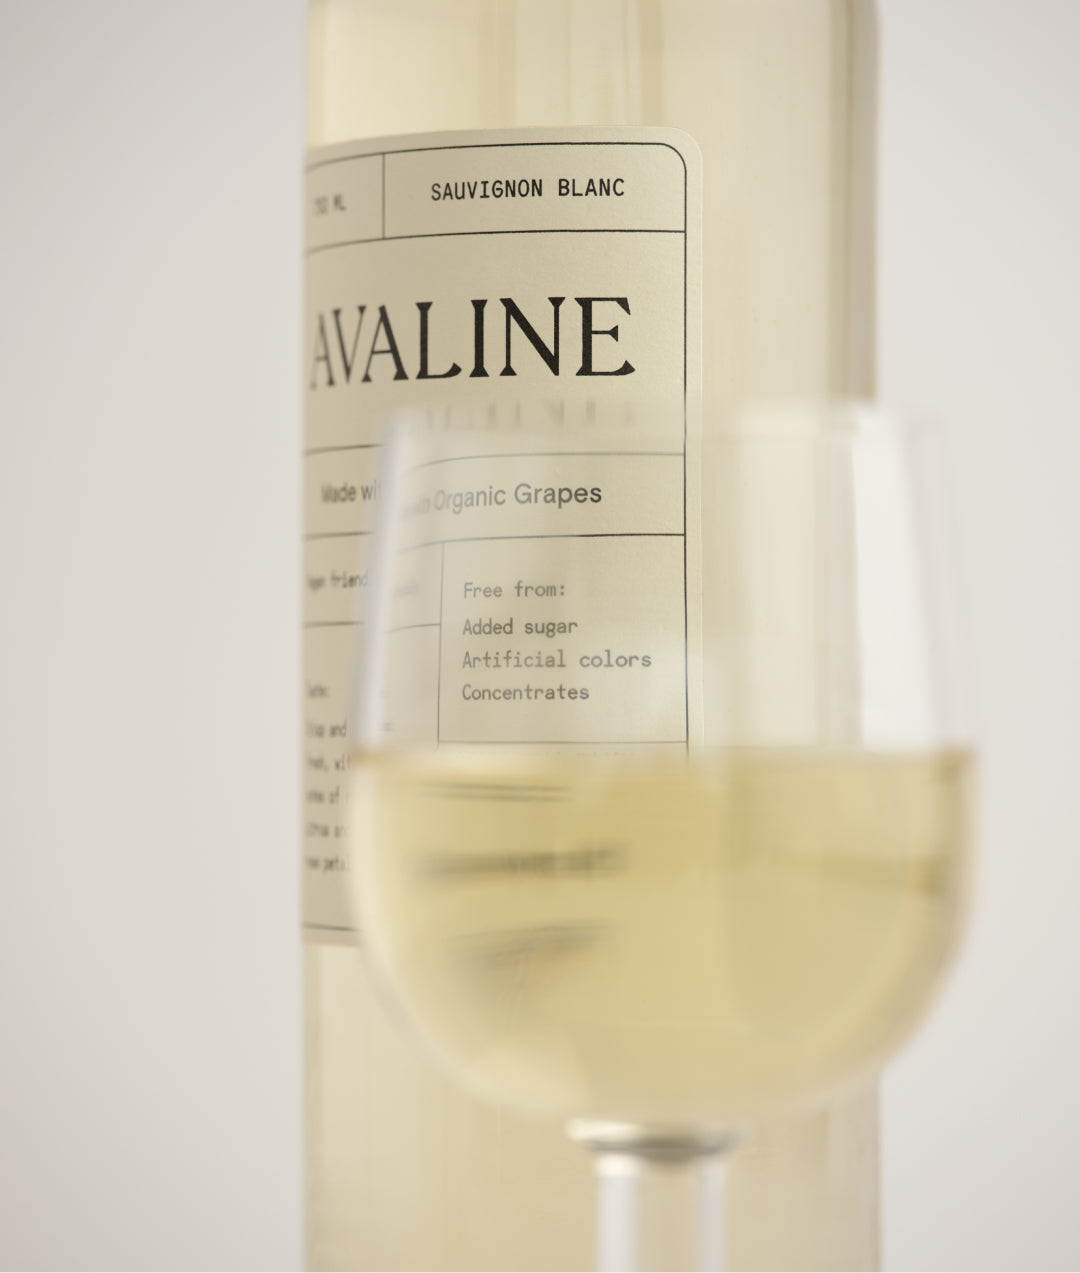 Side image of bottle of Sauvignon Blanc with a glass of wine in front of the bottle